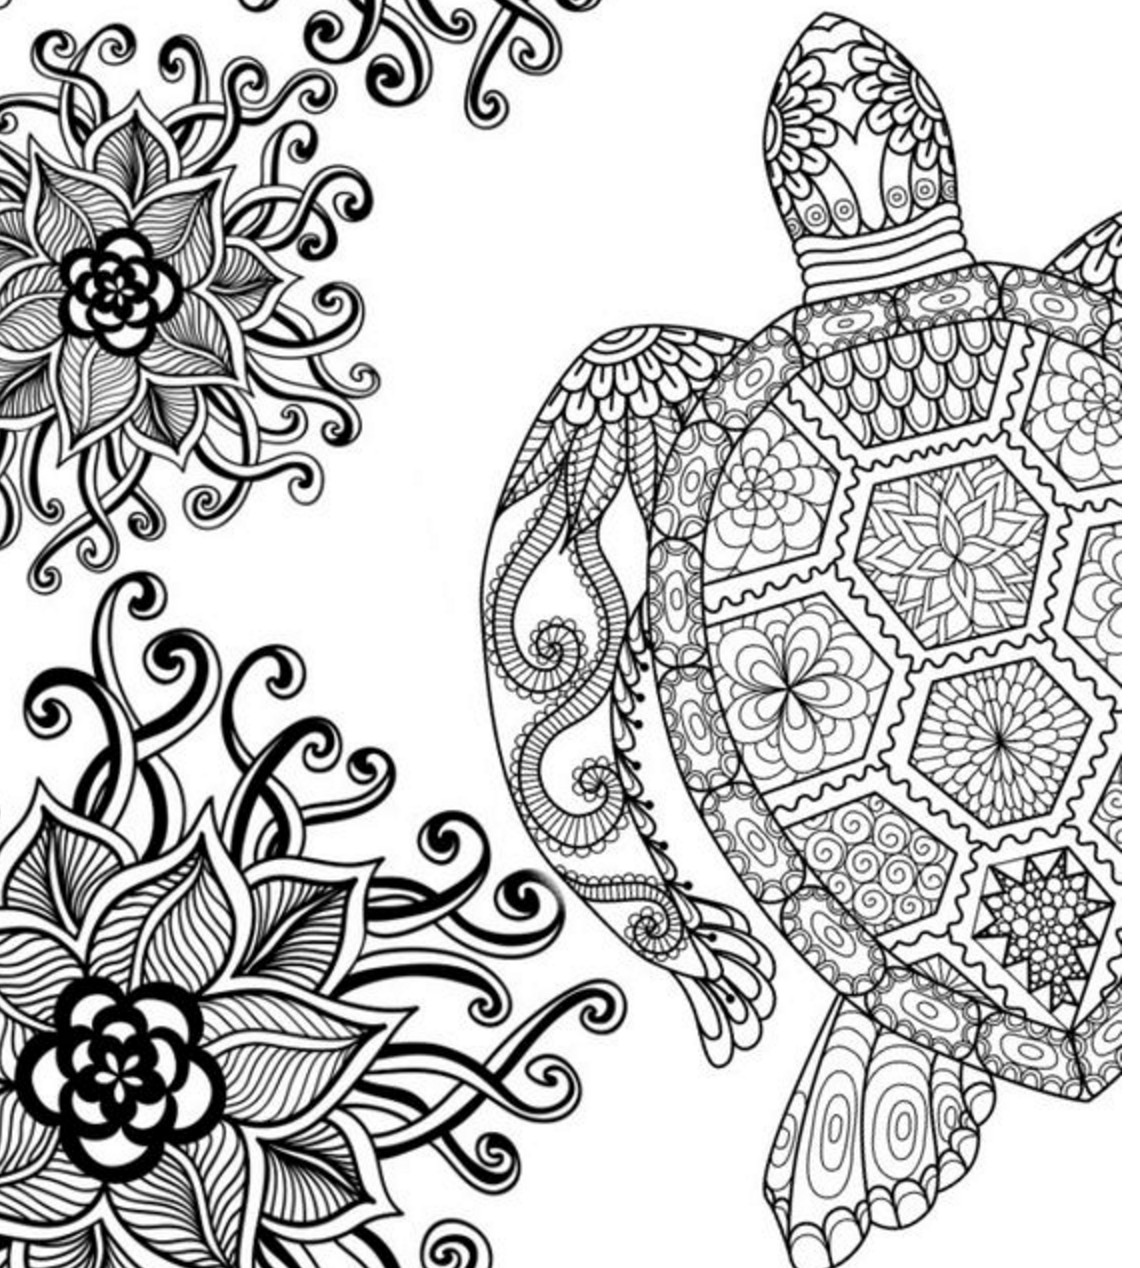 Cool Printable Coloring Pages For Adults
 20 Free Adult Colouring Pages The Organised Housewife